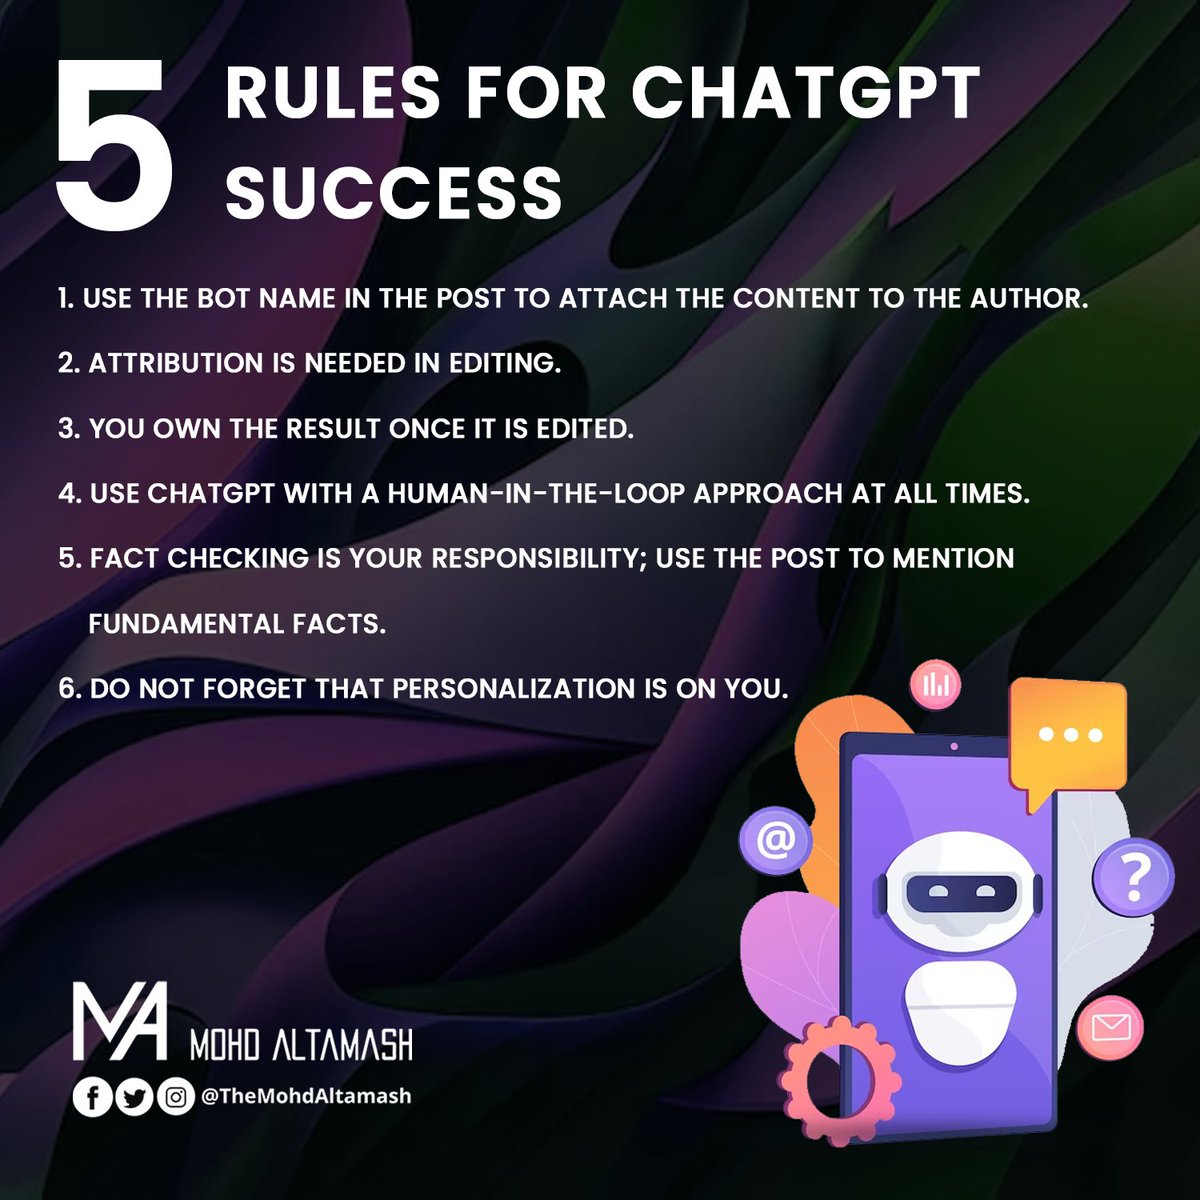 5 Rules for ChatGPT success

#chatgpt #altamash #technology #ai #openai #chatbots #supportsolutions #RoboticTechnology